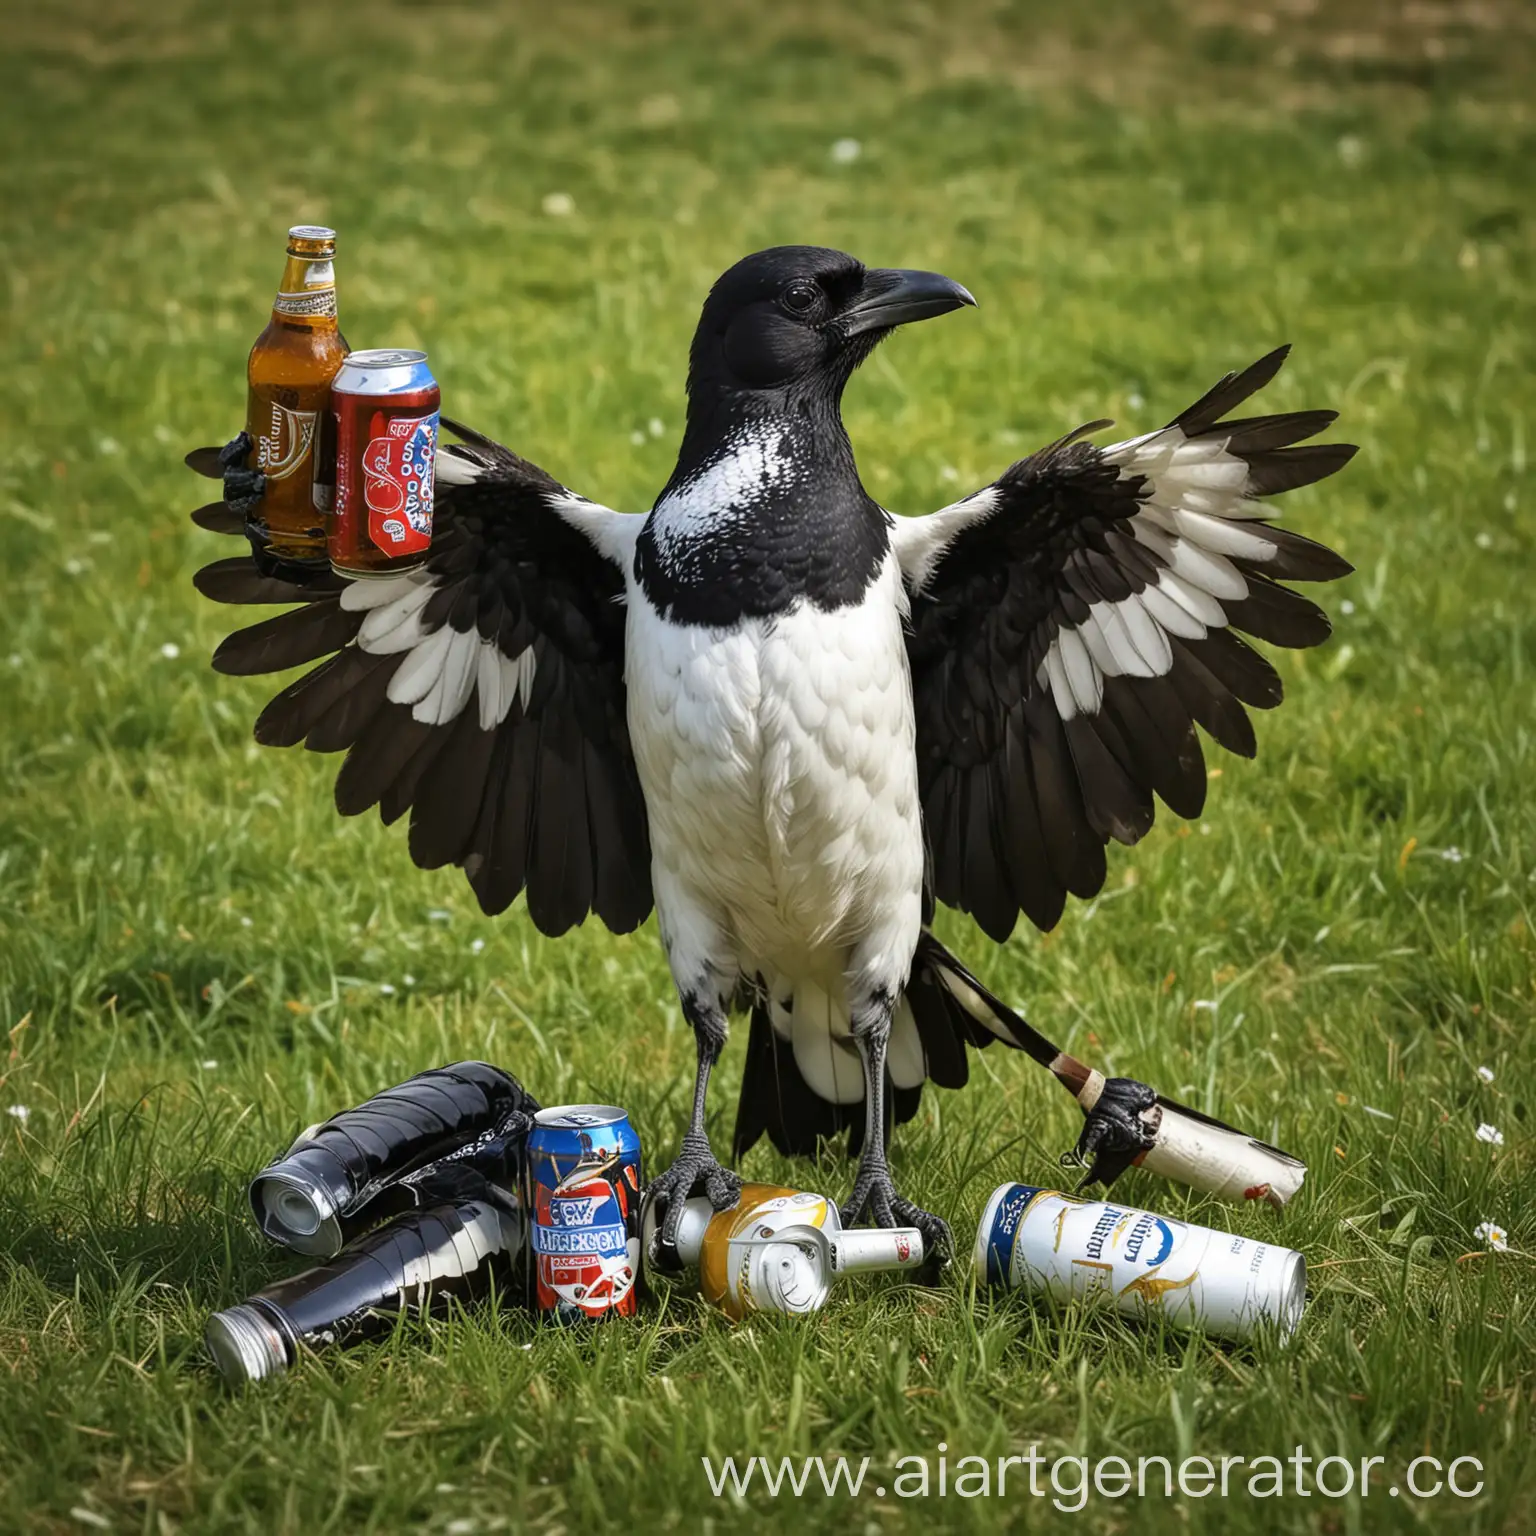 Humorous-Drunk-Magpie-Holding-Beer-Can-on-Grass